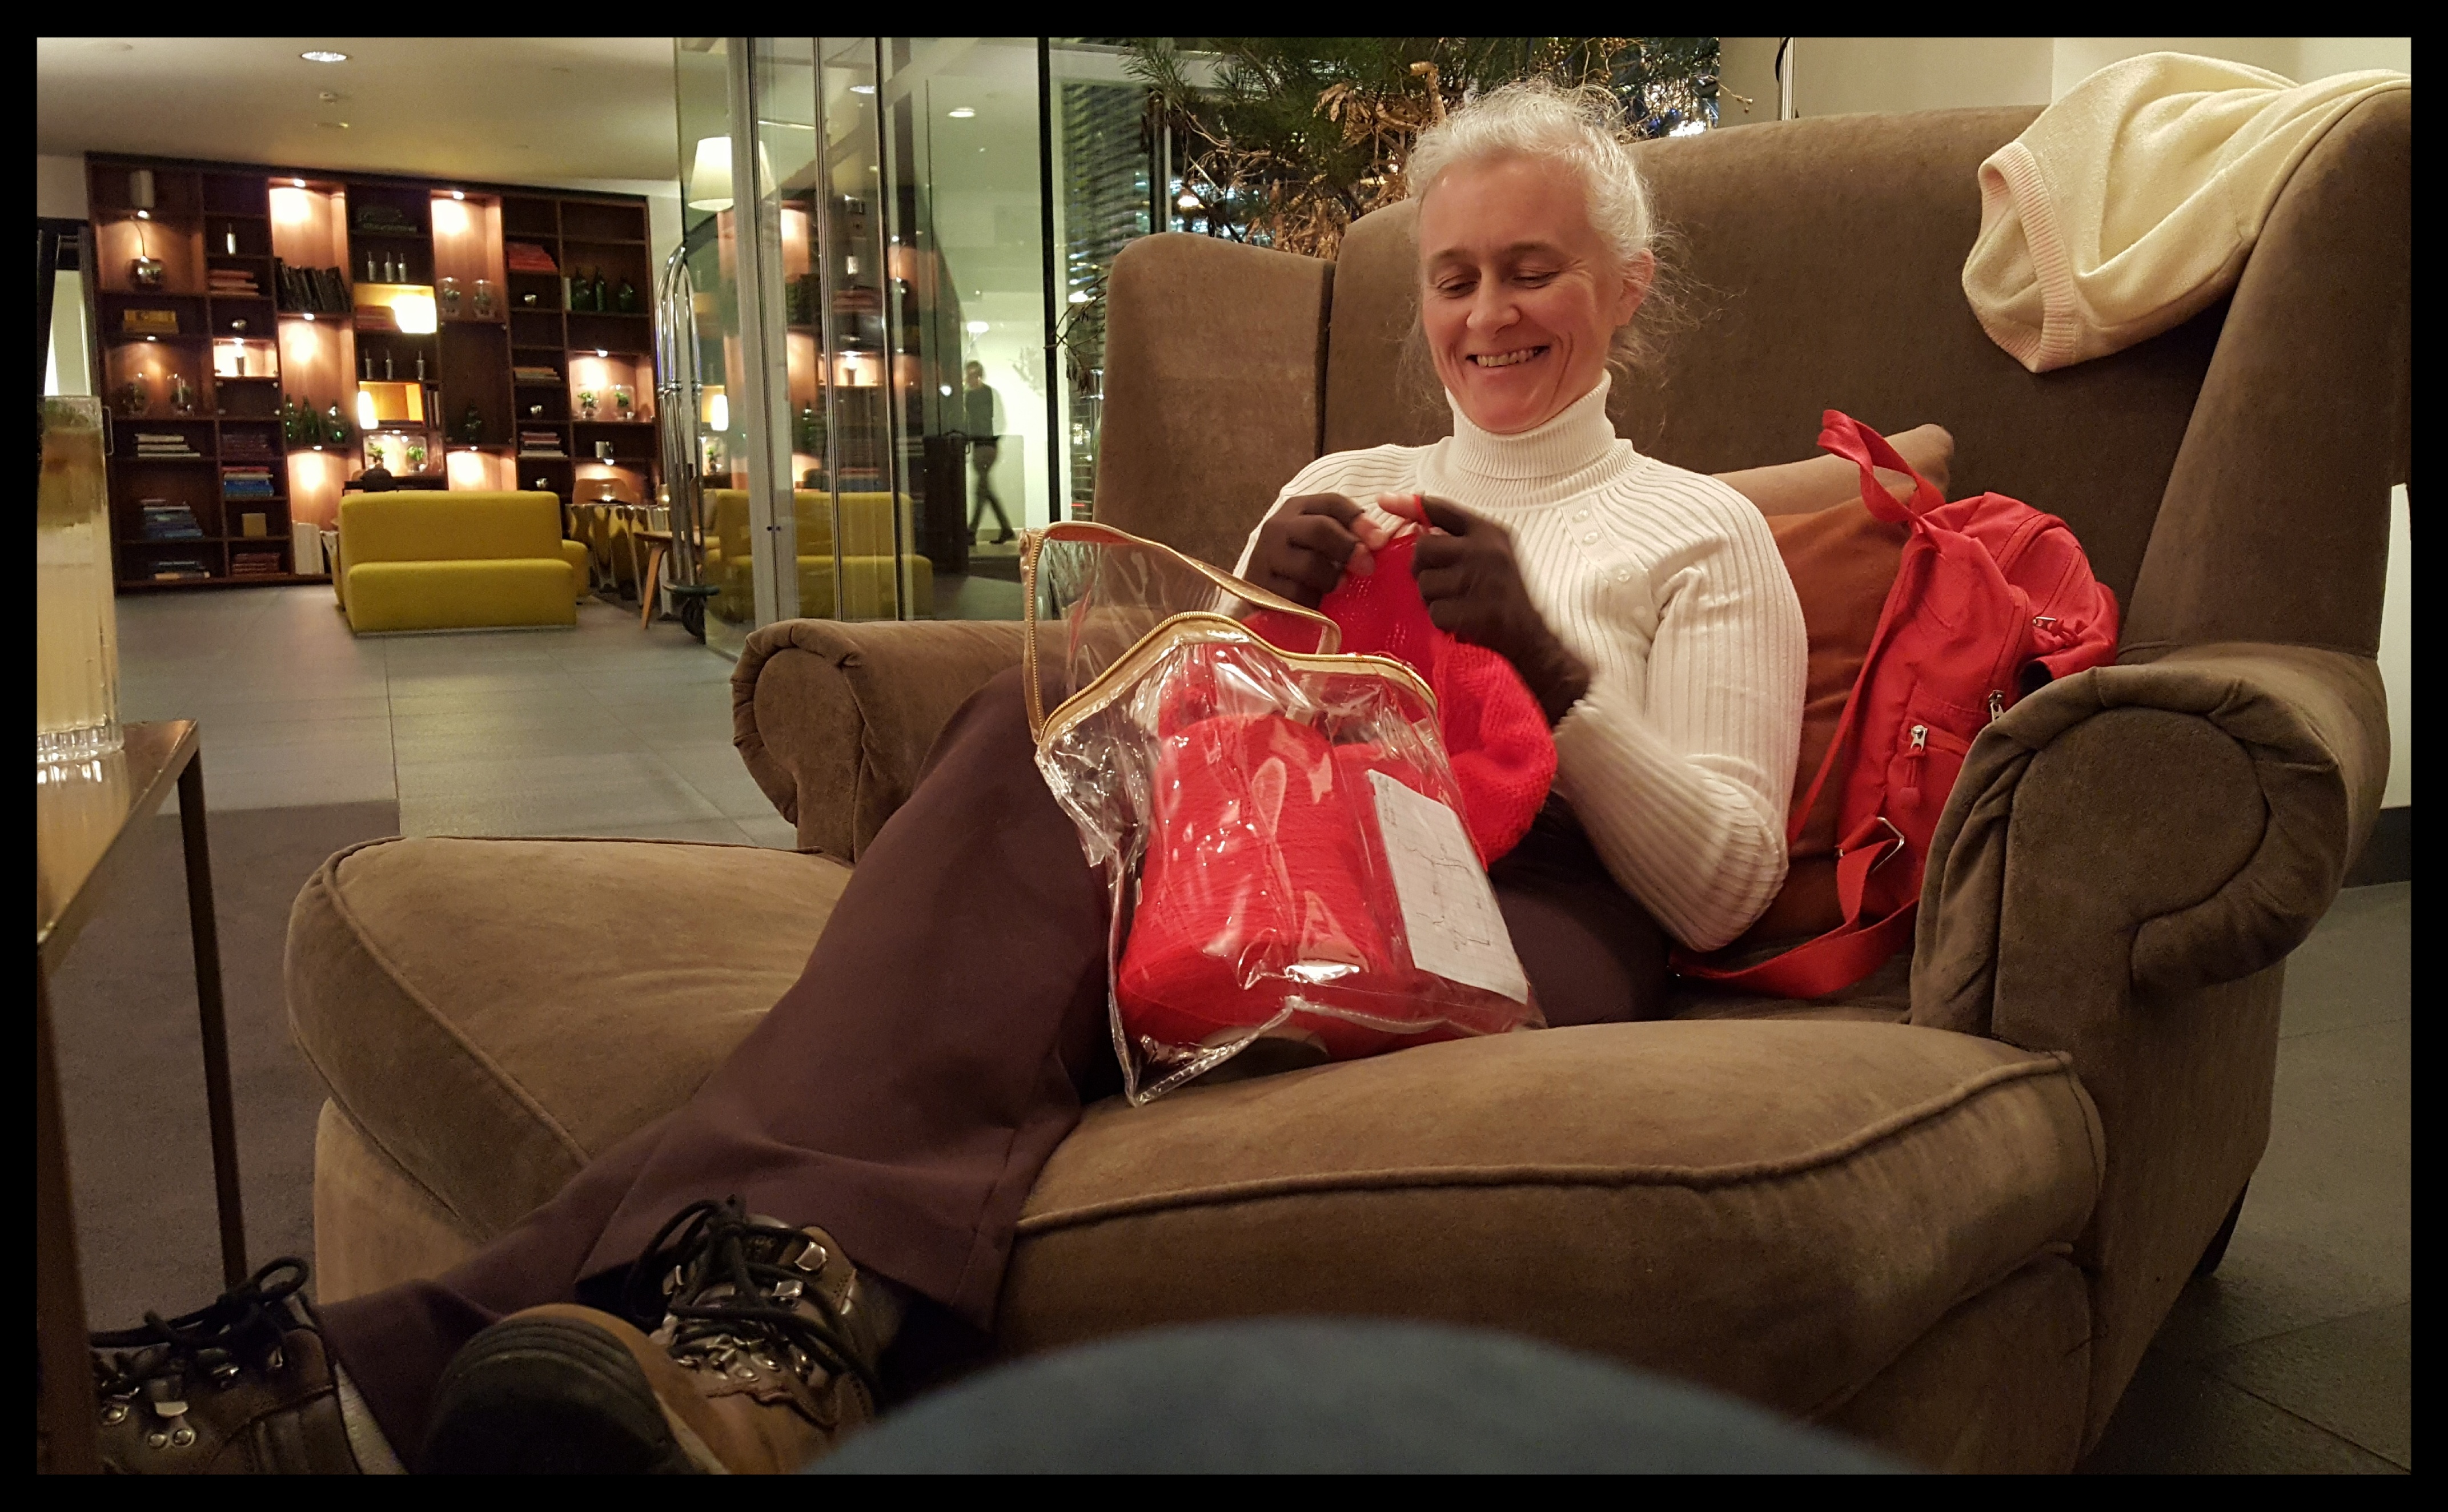 My brother's wife can knit anywhere. Here she is in a giant chair in their hotel lobby. Photo by Dragonfly Leathrum